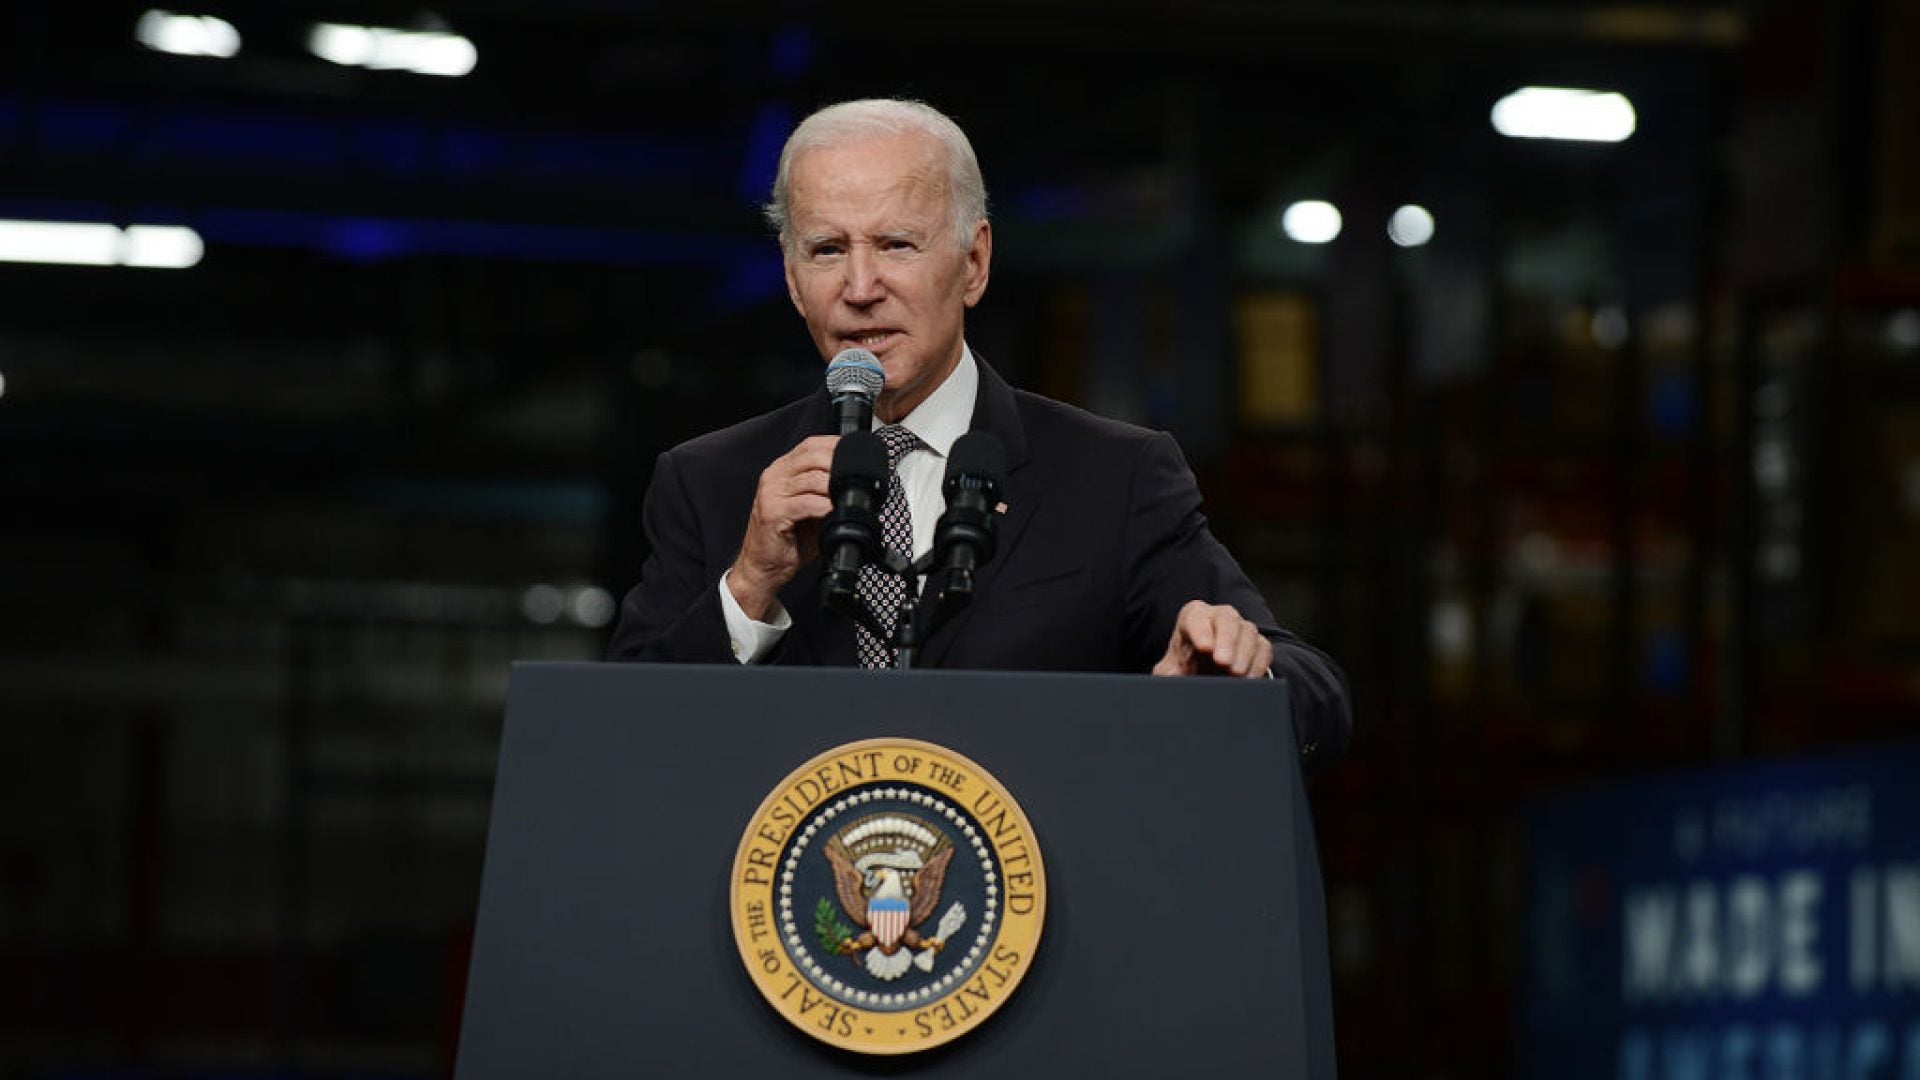 President Biden: All Prior Federal Convictions Of Simple Marijuana Possession Will Be Pardoned